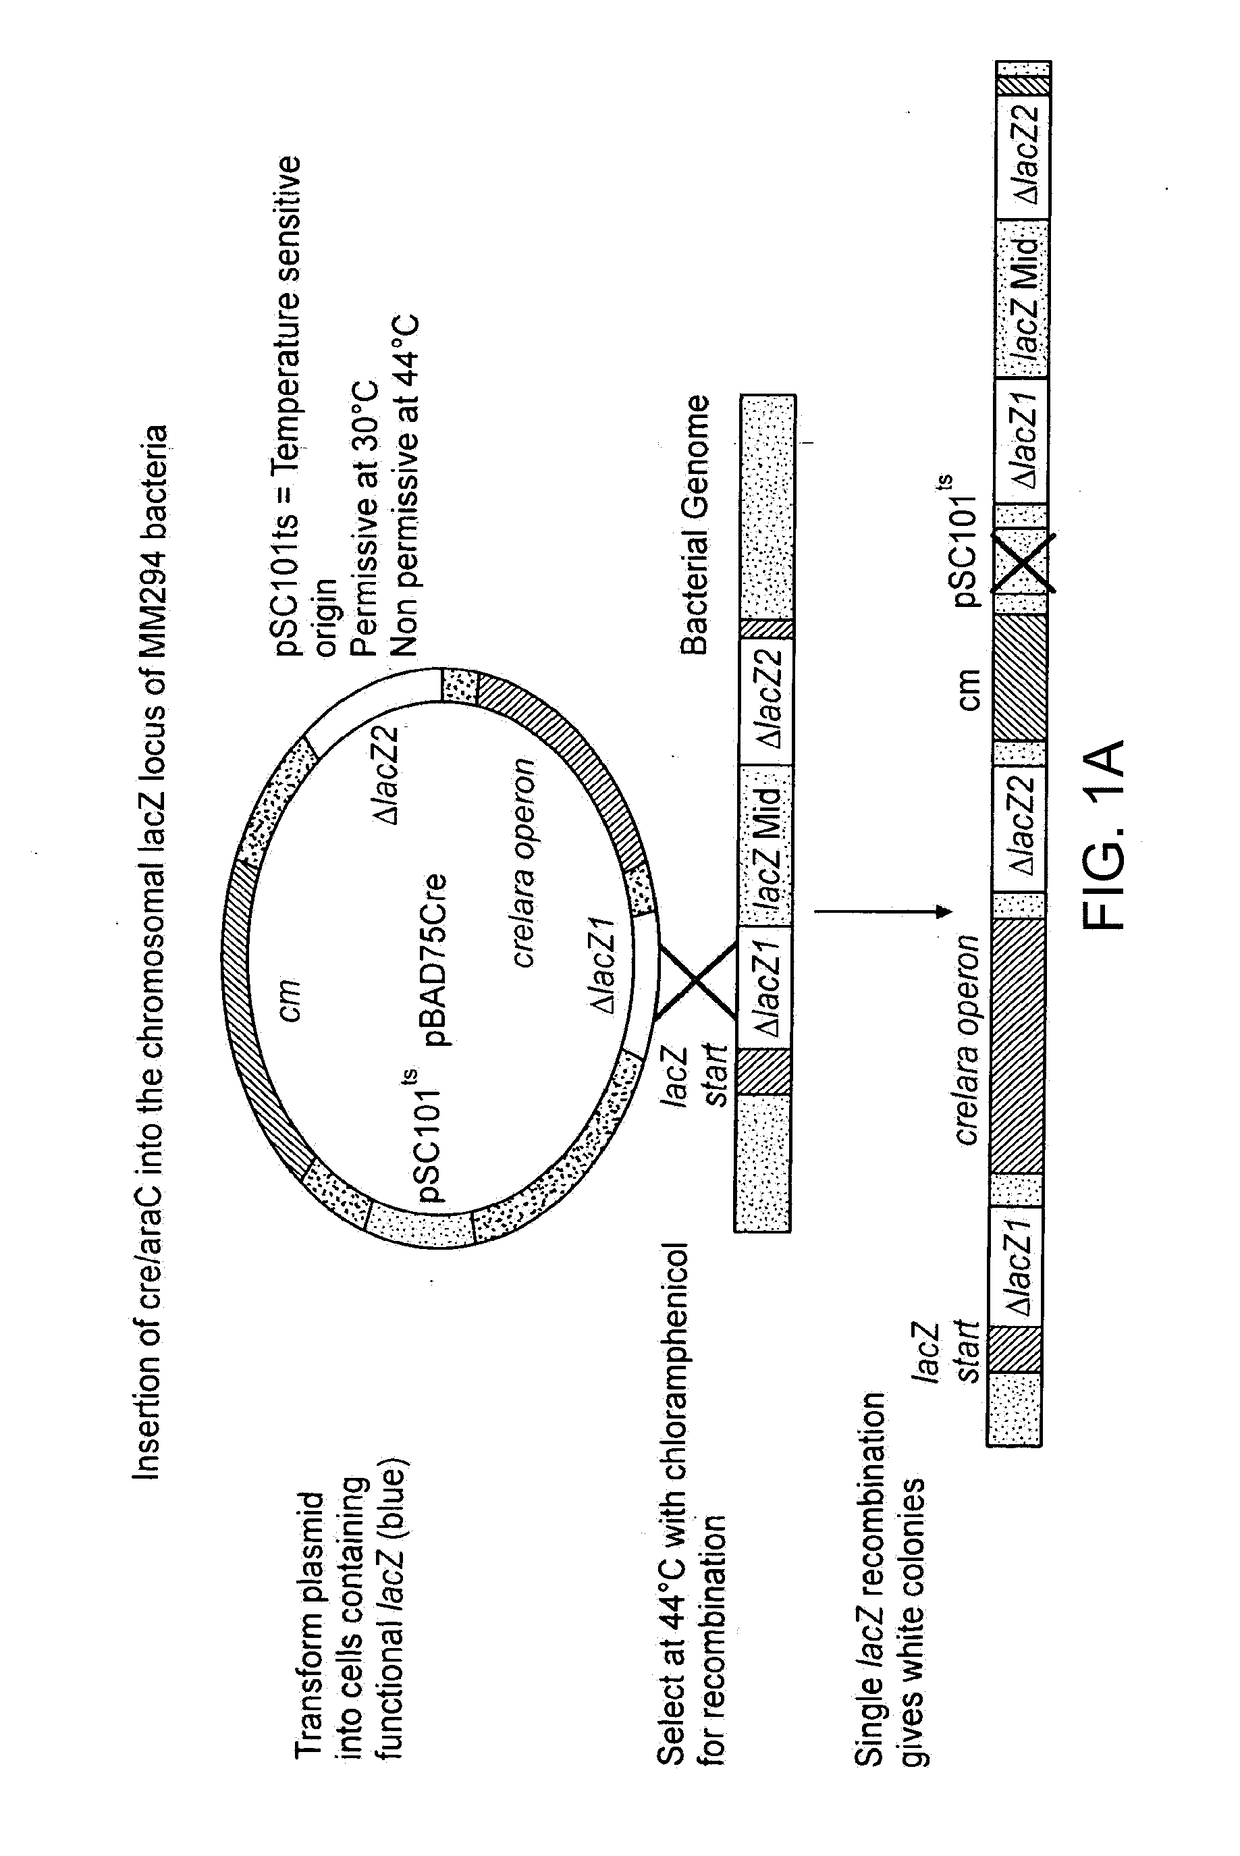 Methods of producing recombinant minicircle constructs